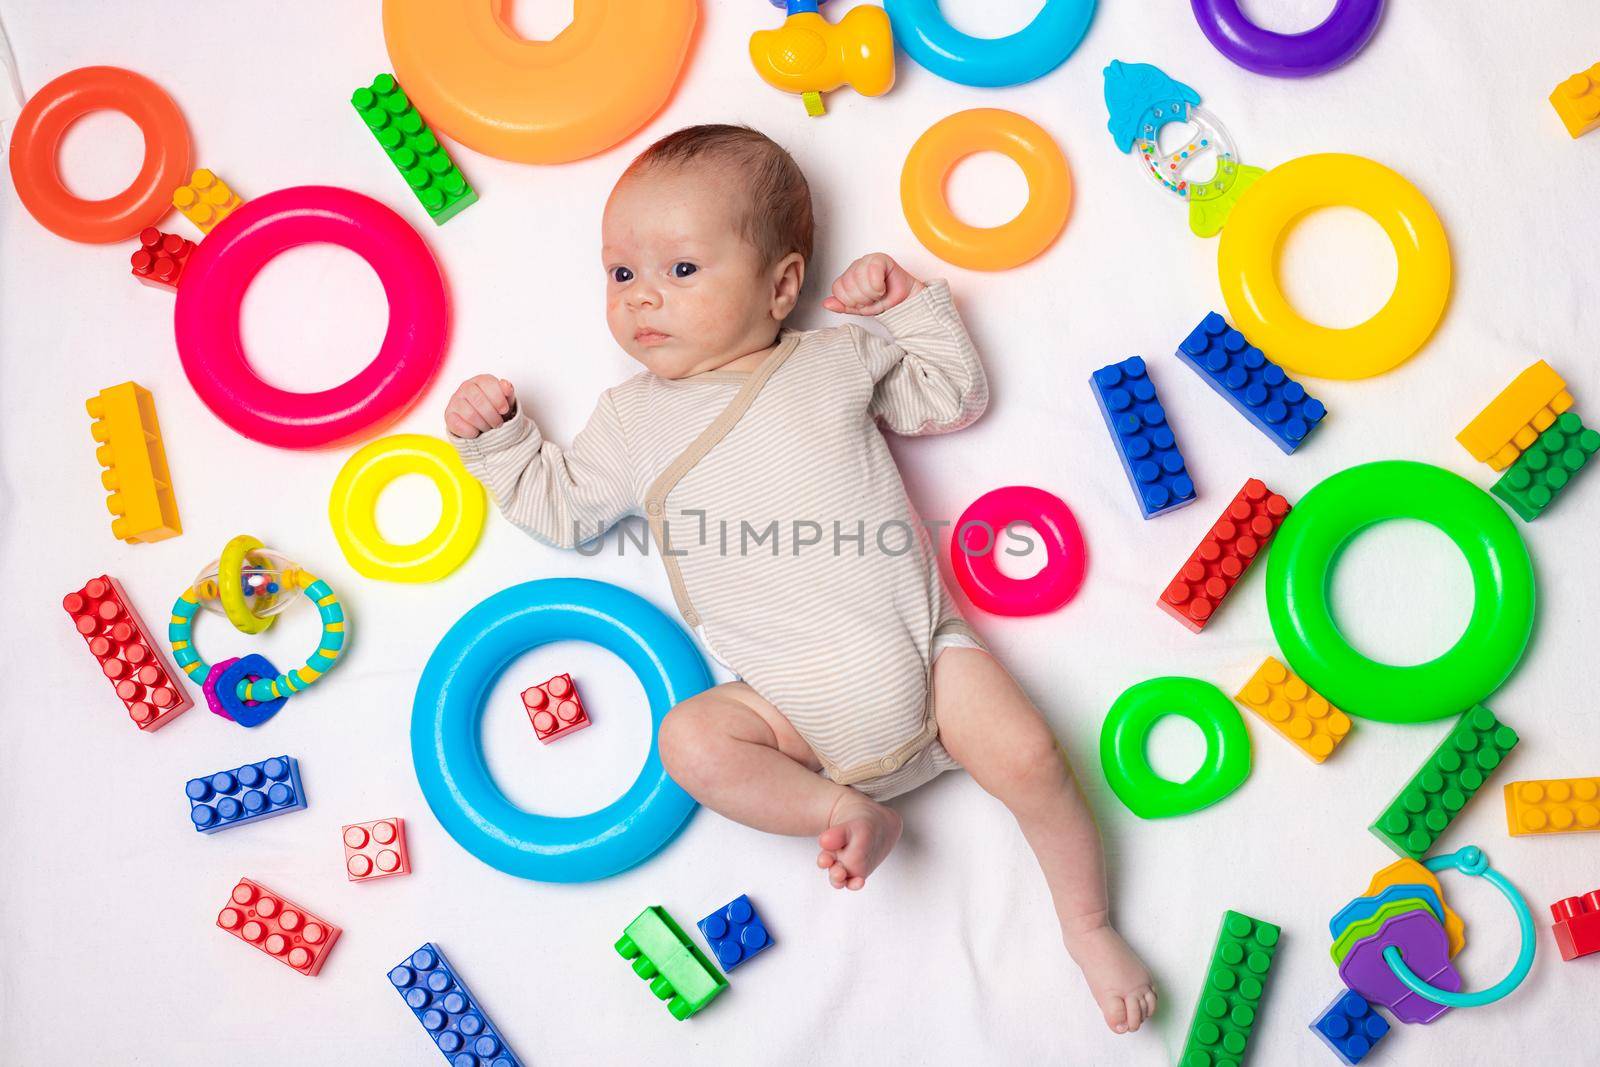 The baby is lying in toys . An article about children's toys. A selection of toys for kids. Designer